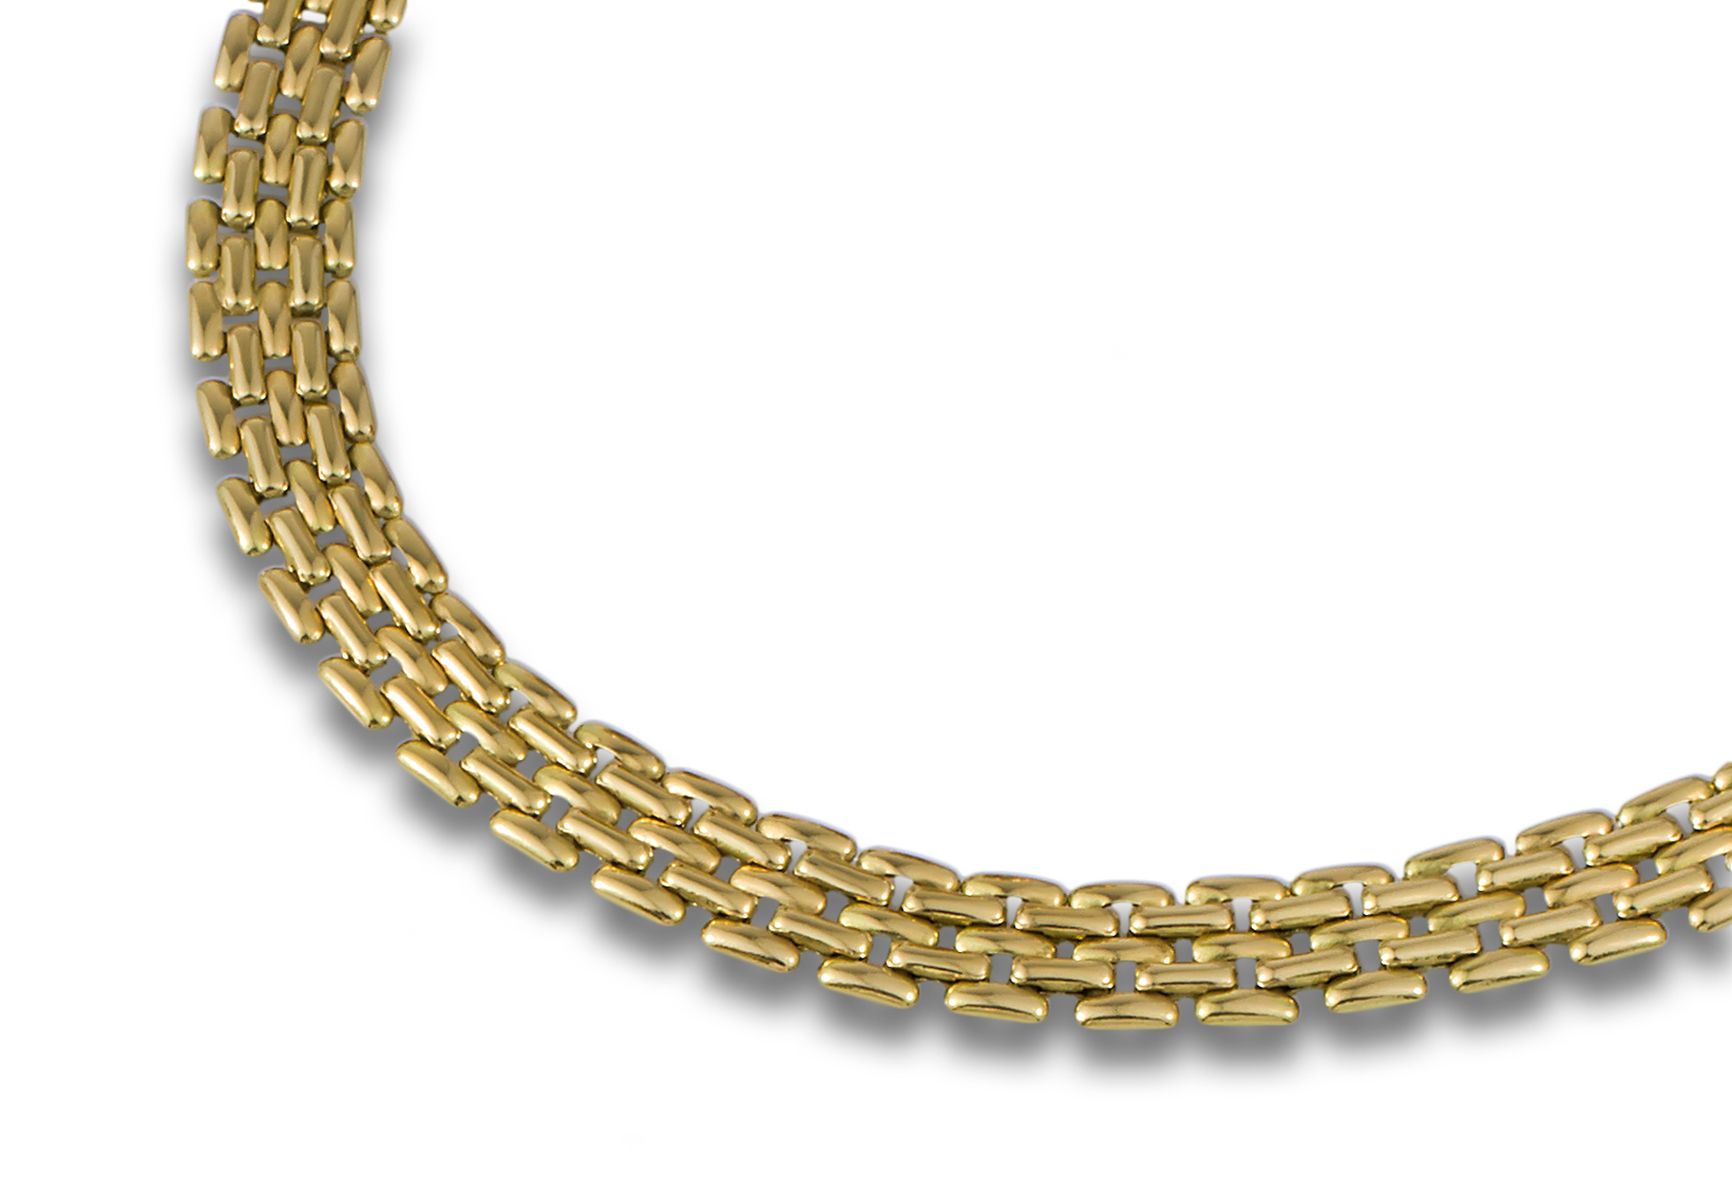 GOLD PANTHERE TYPE CHOKER 18kt yellow gold panther necklace. Weight: 40.85 gr. .